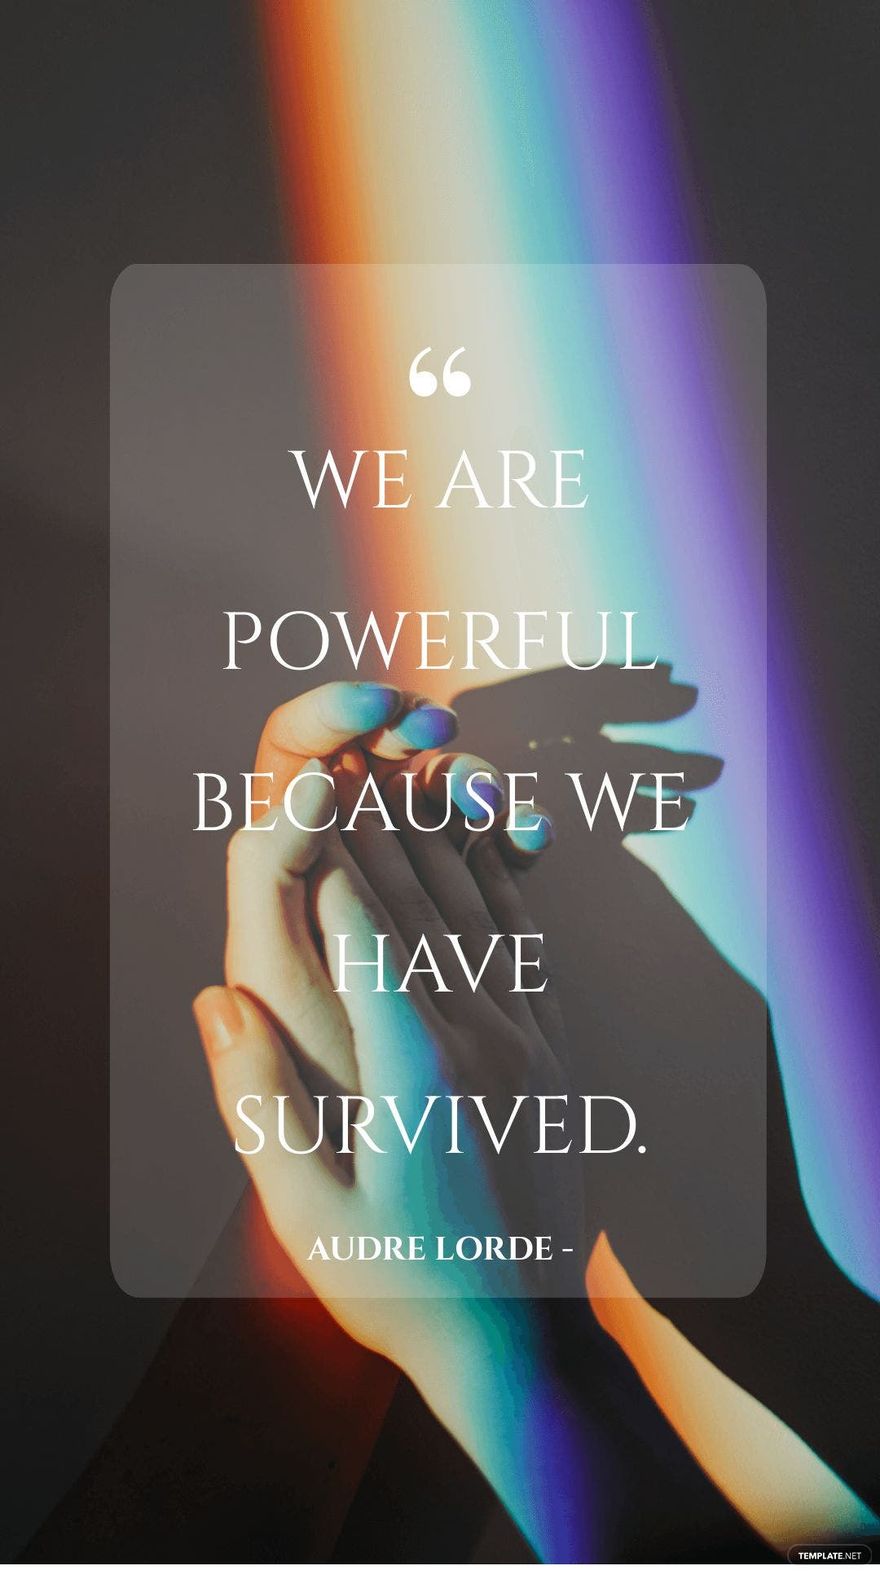 Free Audre Lorde - We are powerful because we have survived.